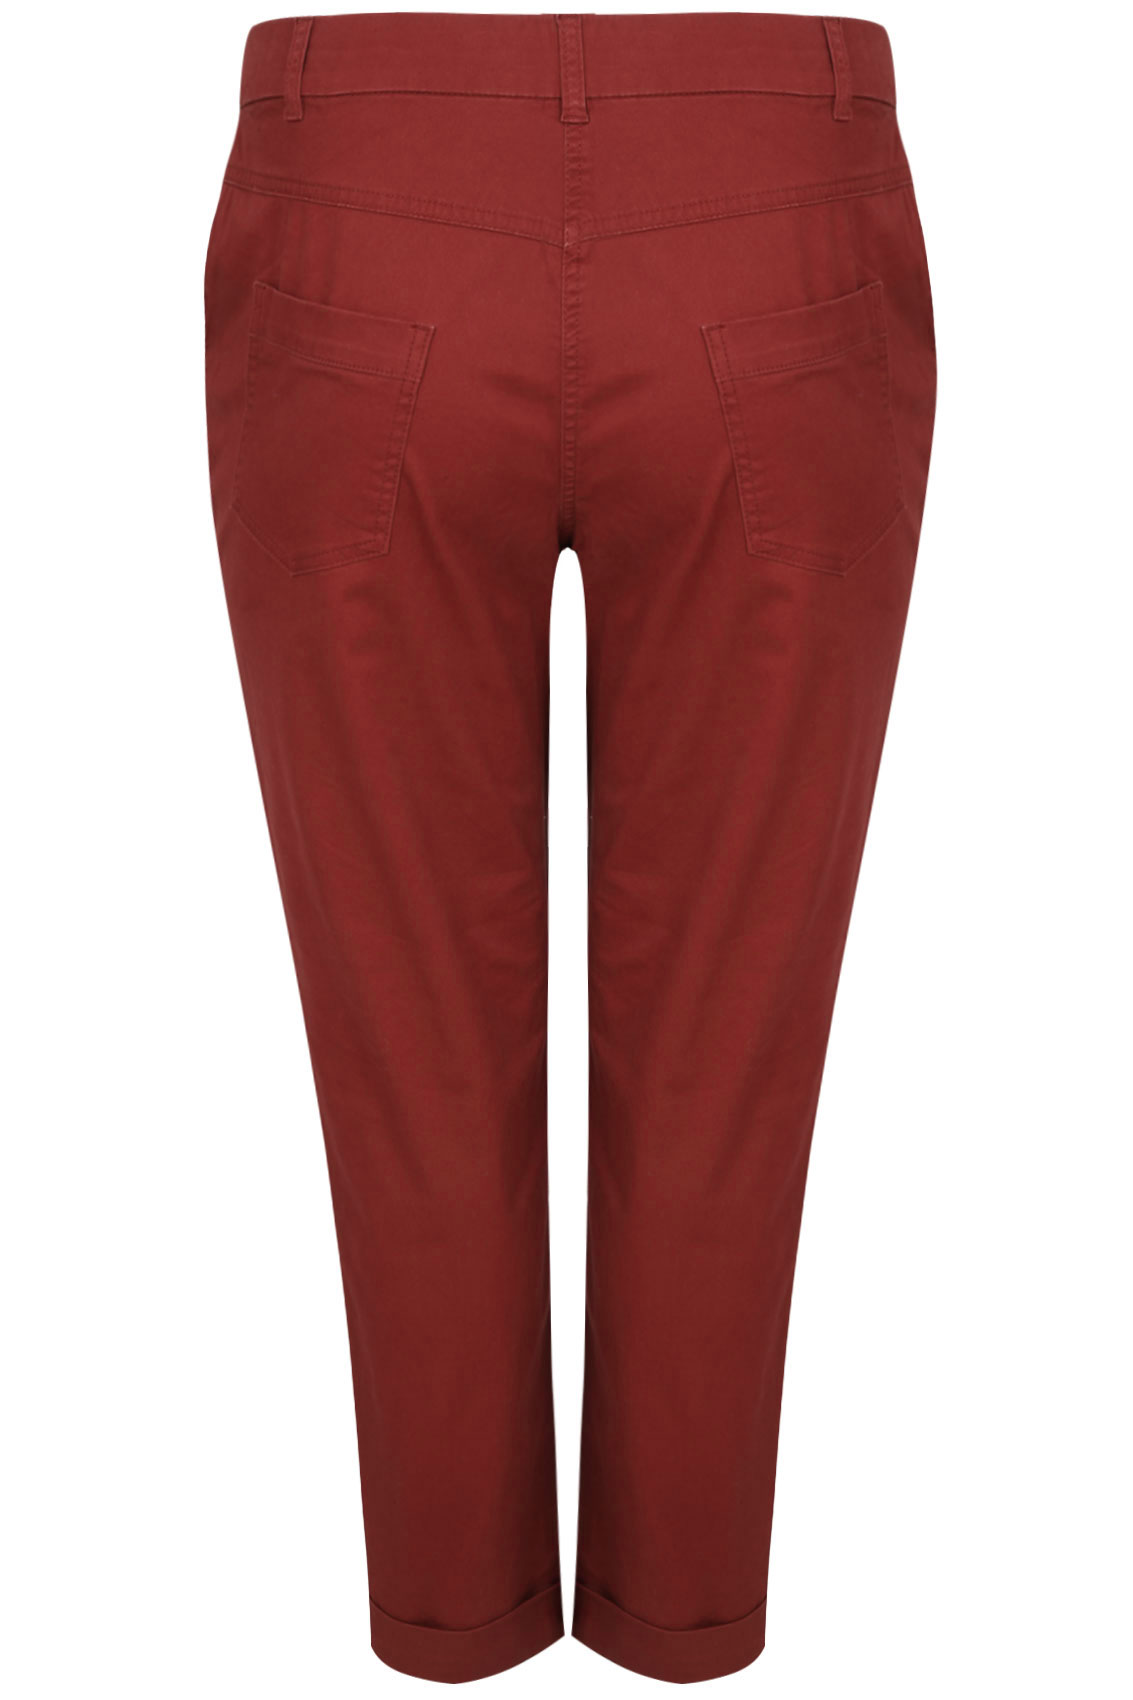 Burgundy Chino Trousers With Turn Back Cuffs Plus Size 14 to 32